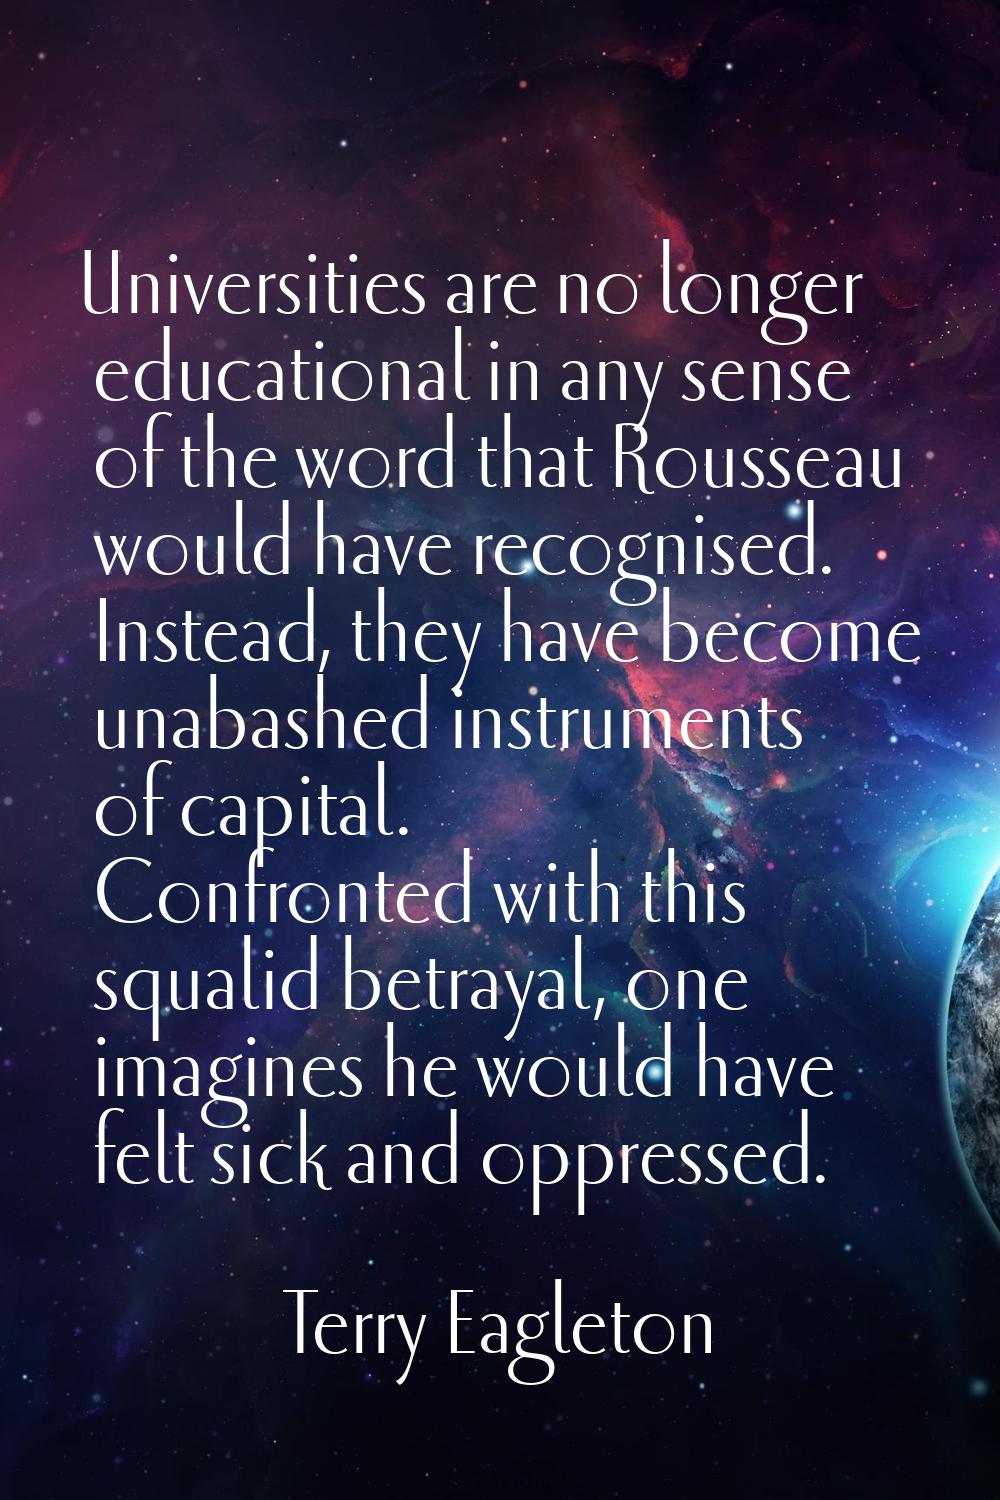 Universities are no longer educational in any sense of the word that Rousseau would have recognised